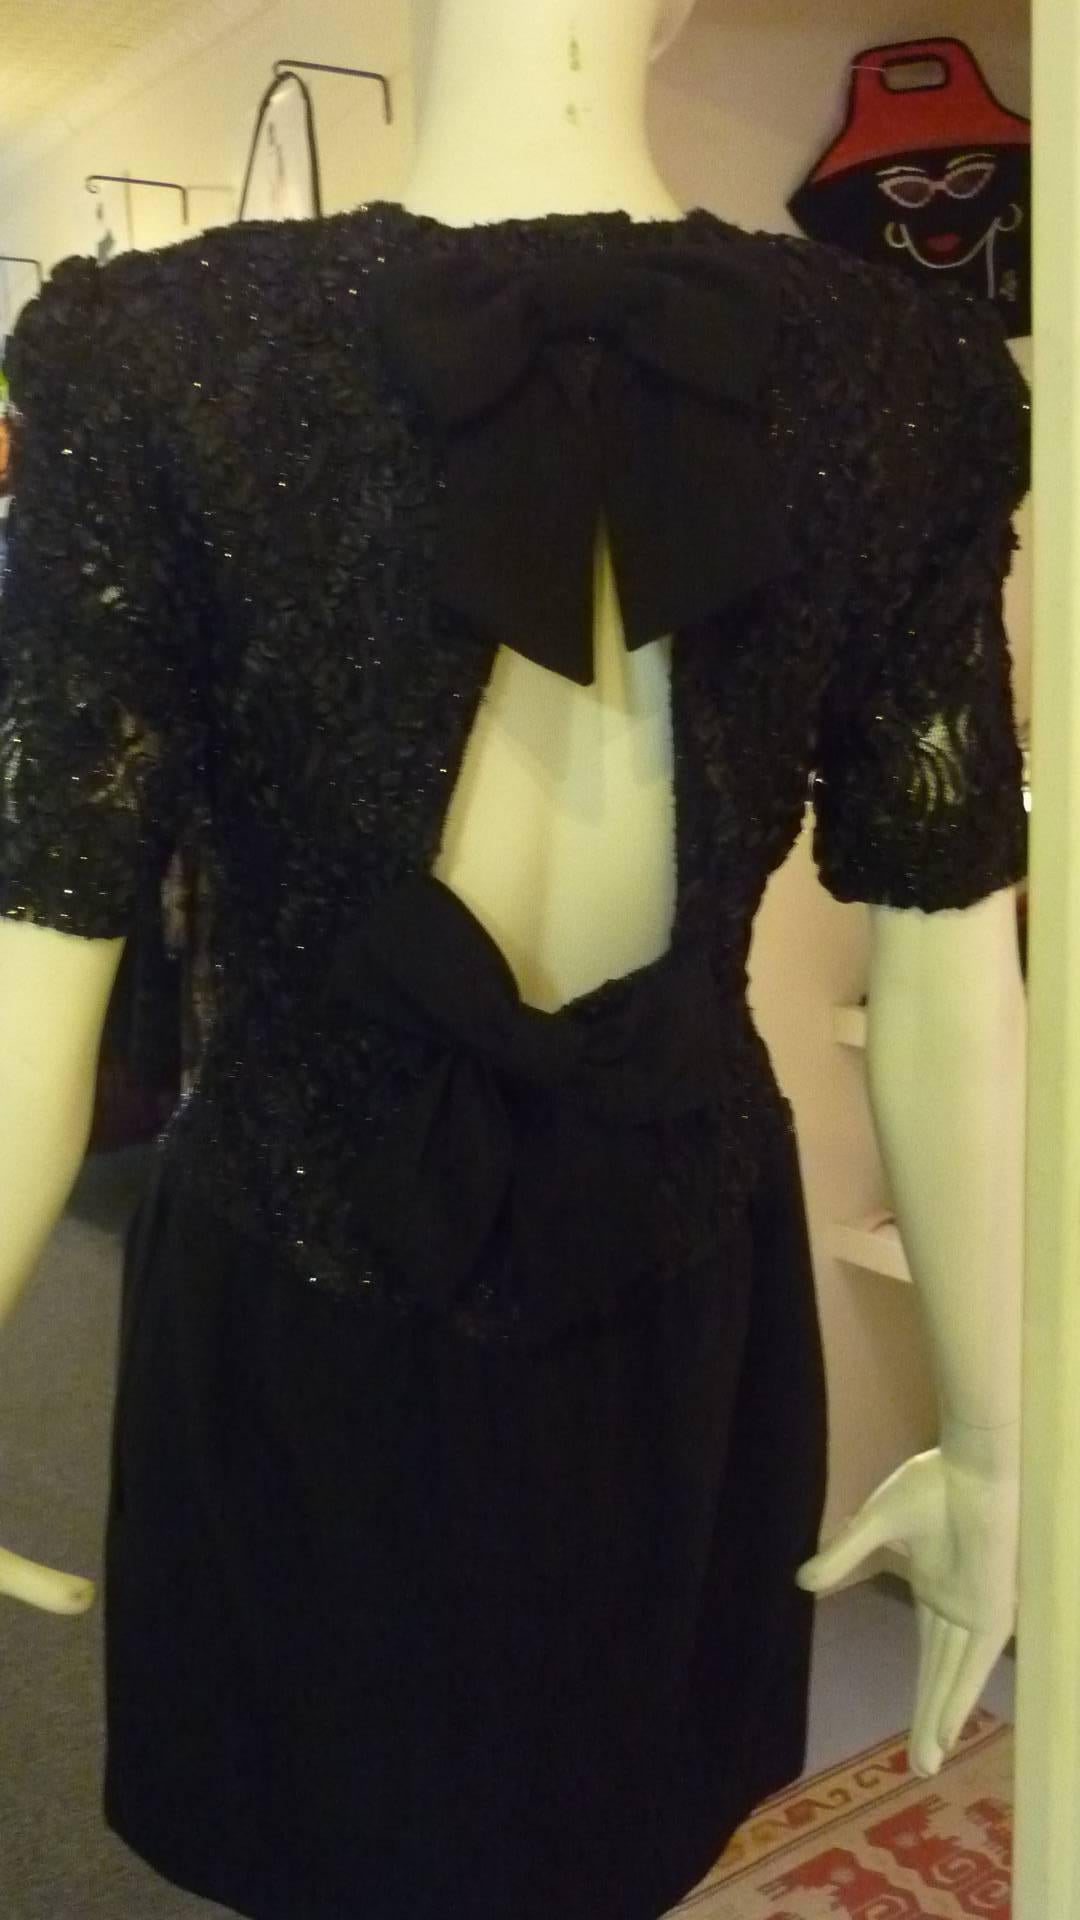 This dress has a dropped waist wool skirt with side slit pockets, and a combination ribbon, net and metallic top. The back is a surprises in that it has a keyhole opening and two beg bows. 

As it is a 1980s it has shoulder pads